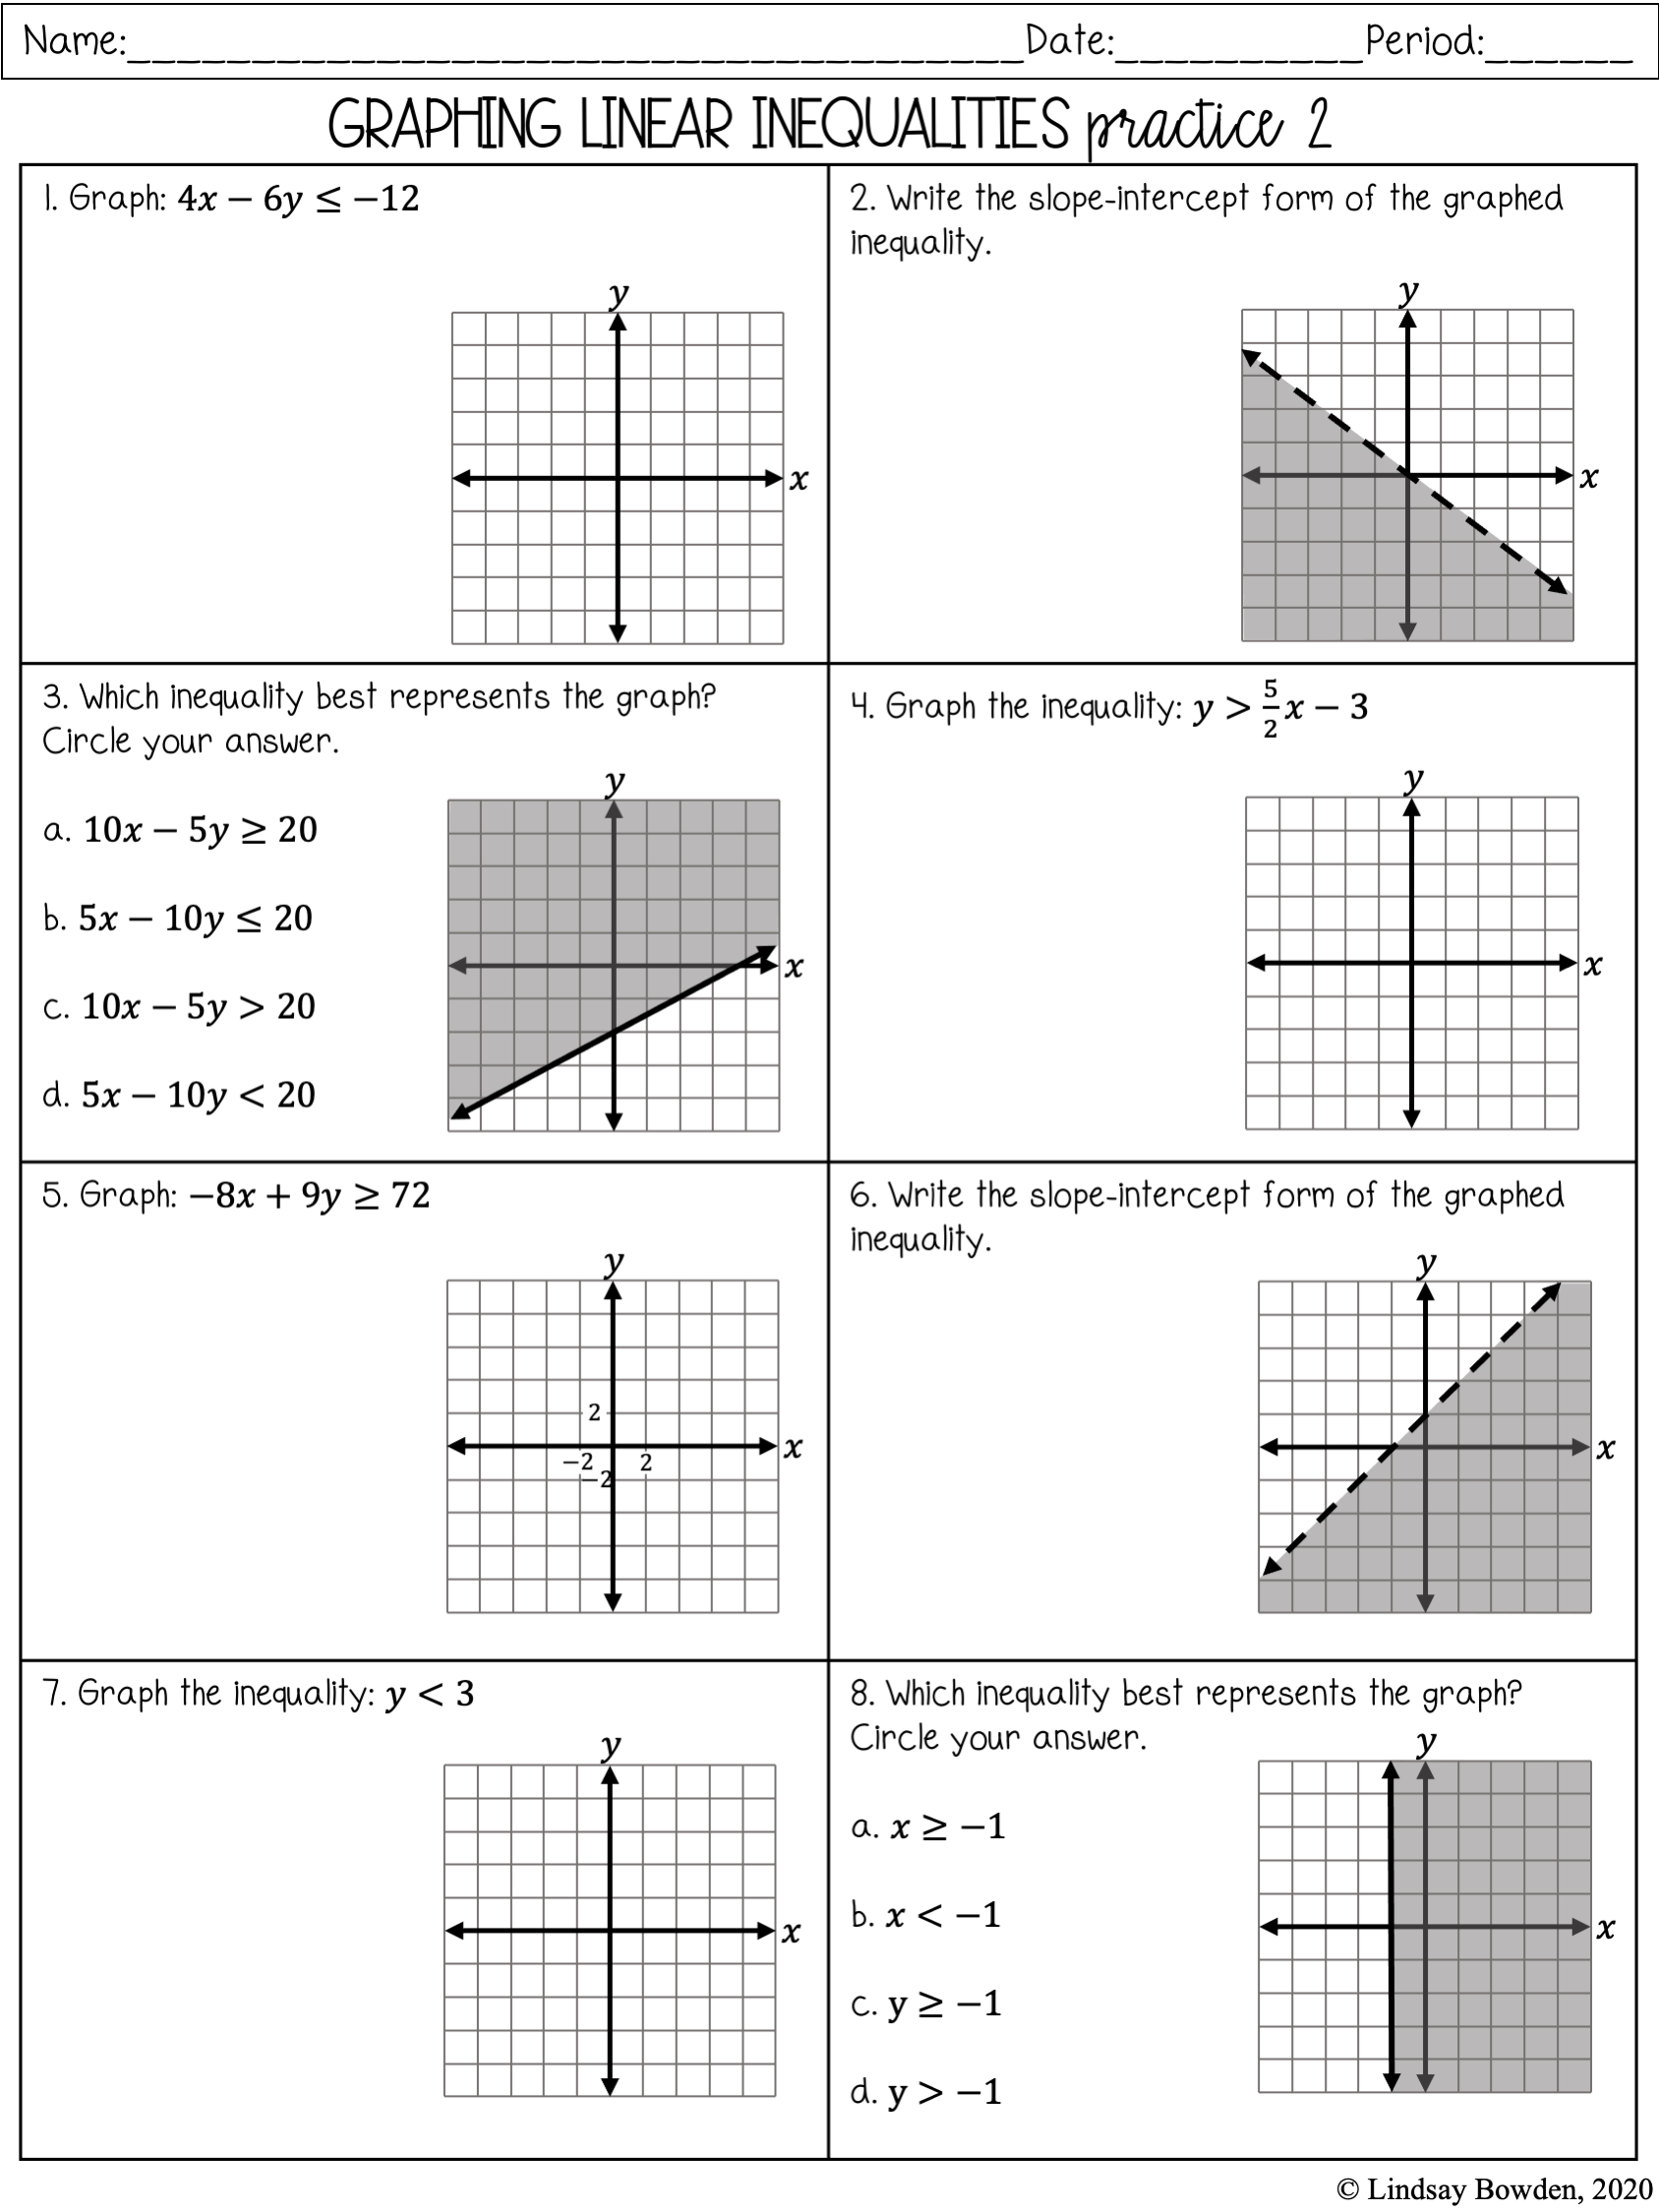 Linear Inequalities Notes and Worksheets - Lindsay Bowden Within Systems Of Linear Inequalities Worksheet